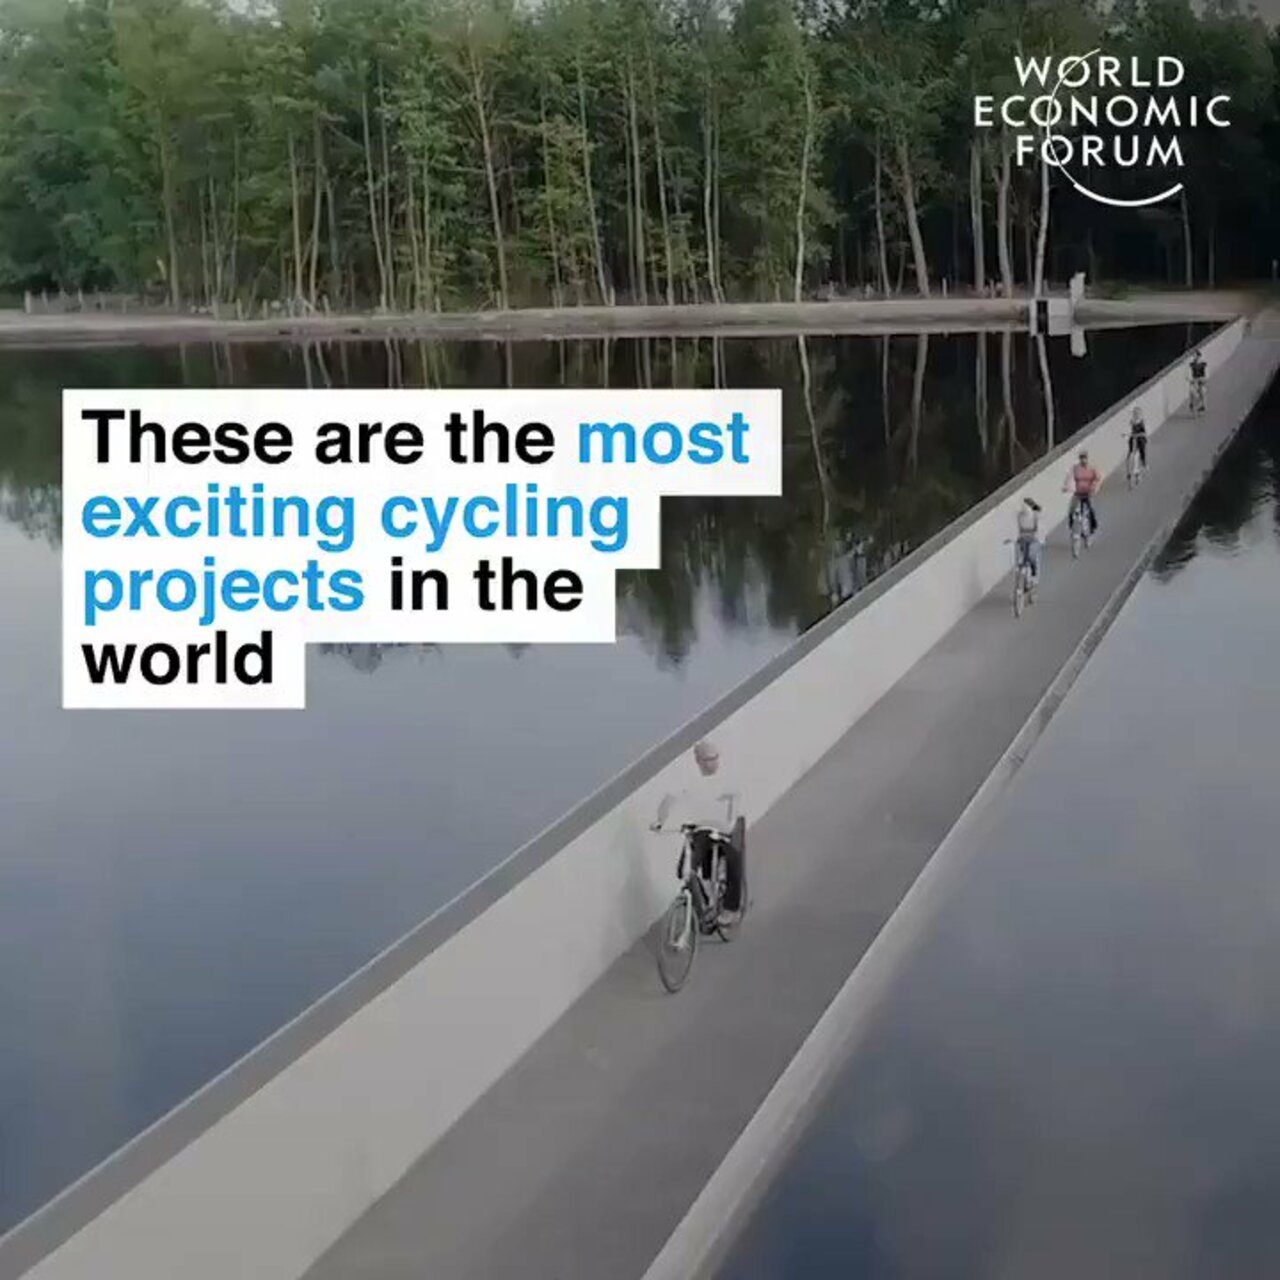 These are the most exciting cycling projects in the world by @wef #Innovation #Influencer #Operation Cc: @enricomolinari @kuriharan @TerenceLeungSF https://t.co/weAqwYW23v